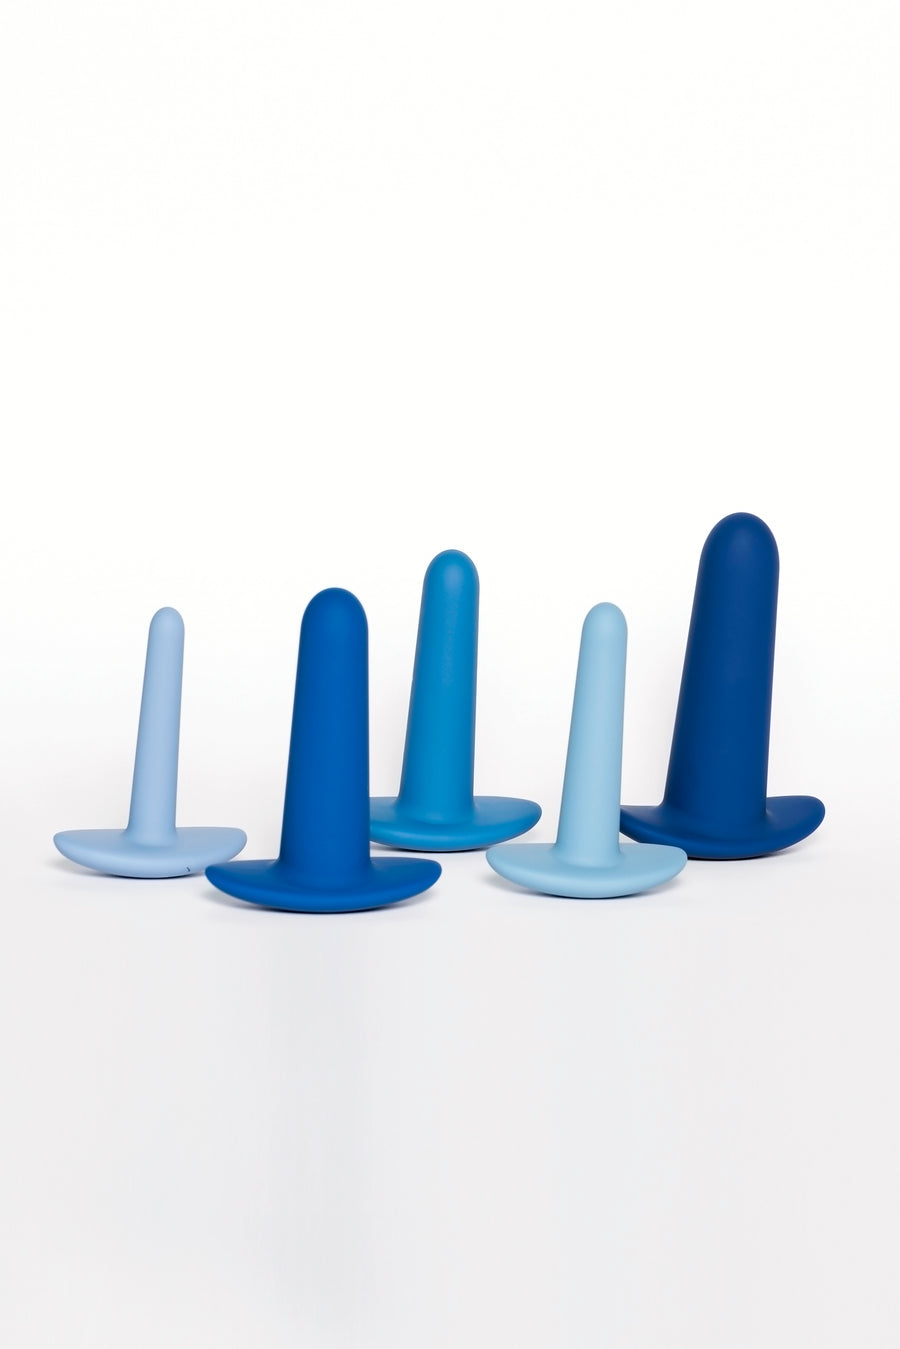 THEY-OLOGY WEARABLE ANAL TRAINING SET 5-PIECE